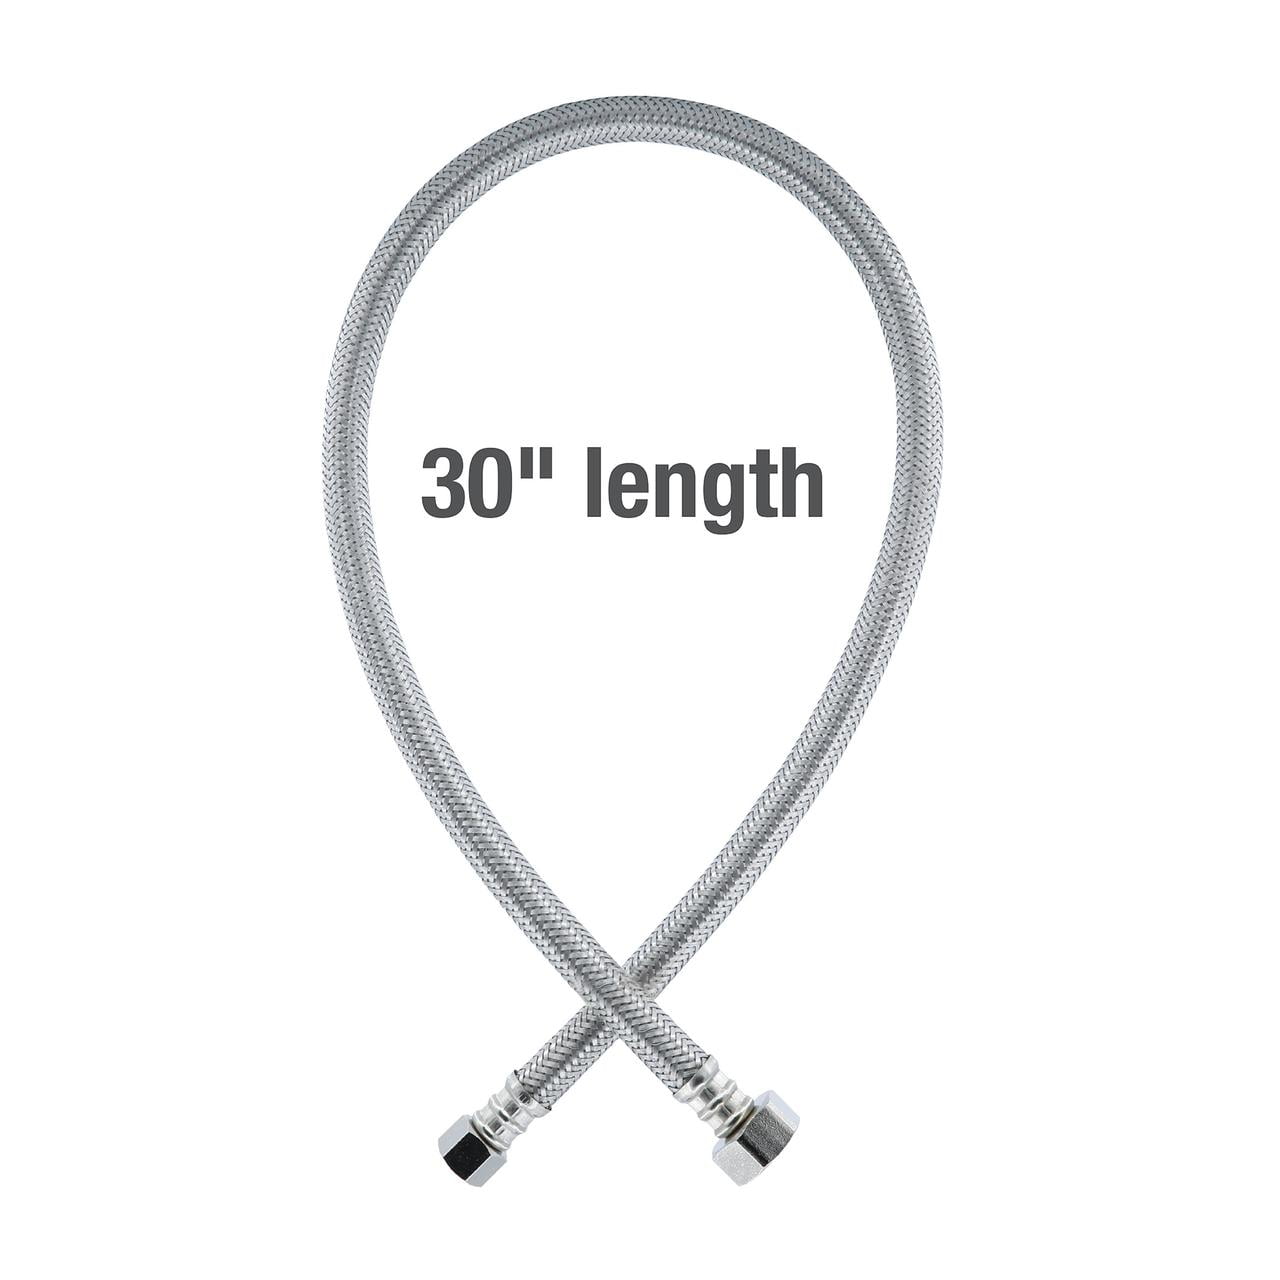 Mainstays 30 inch Stainless Steel Faucet Supply Line Hose (59705)